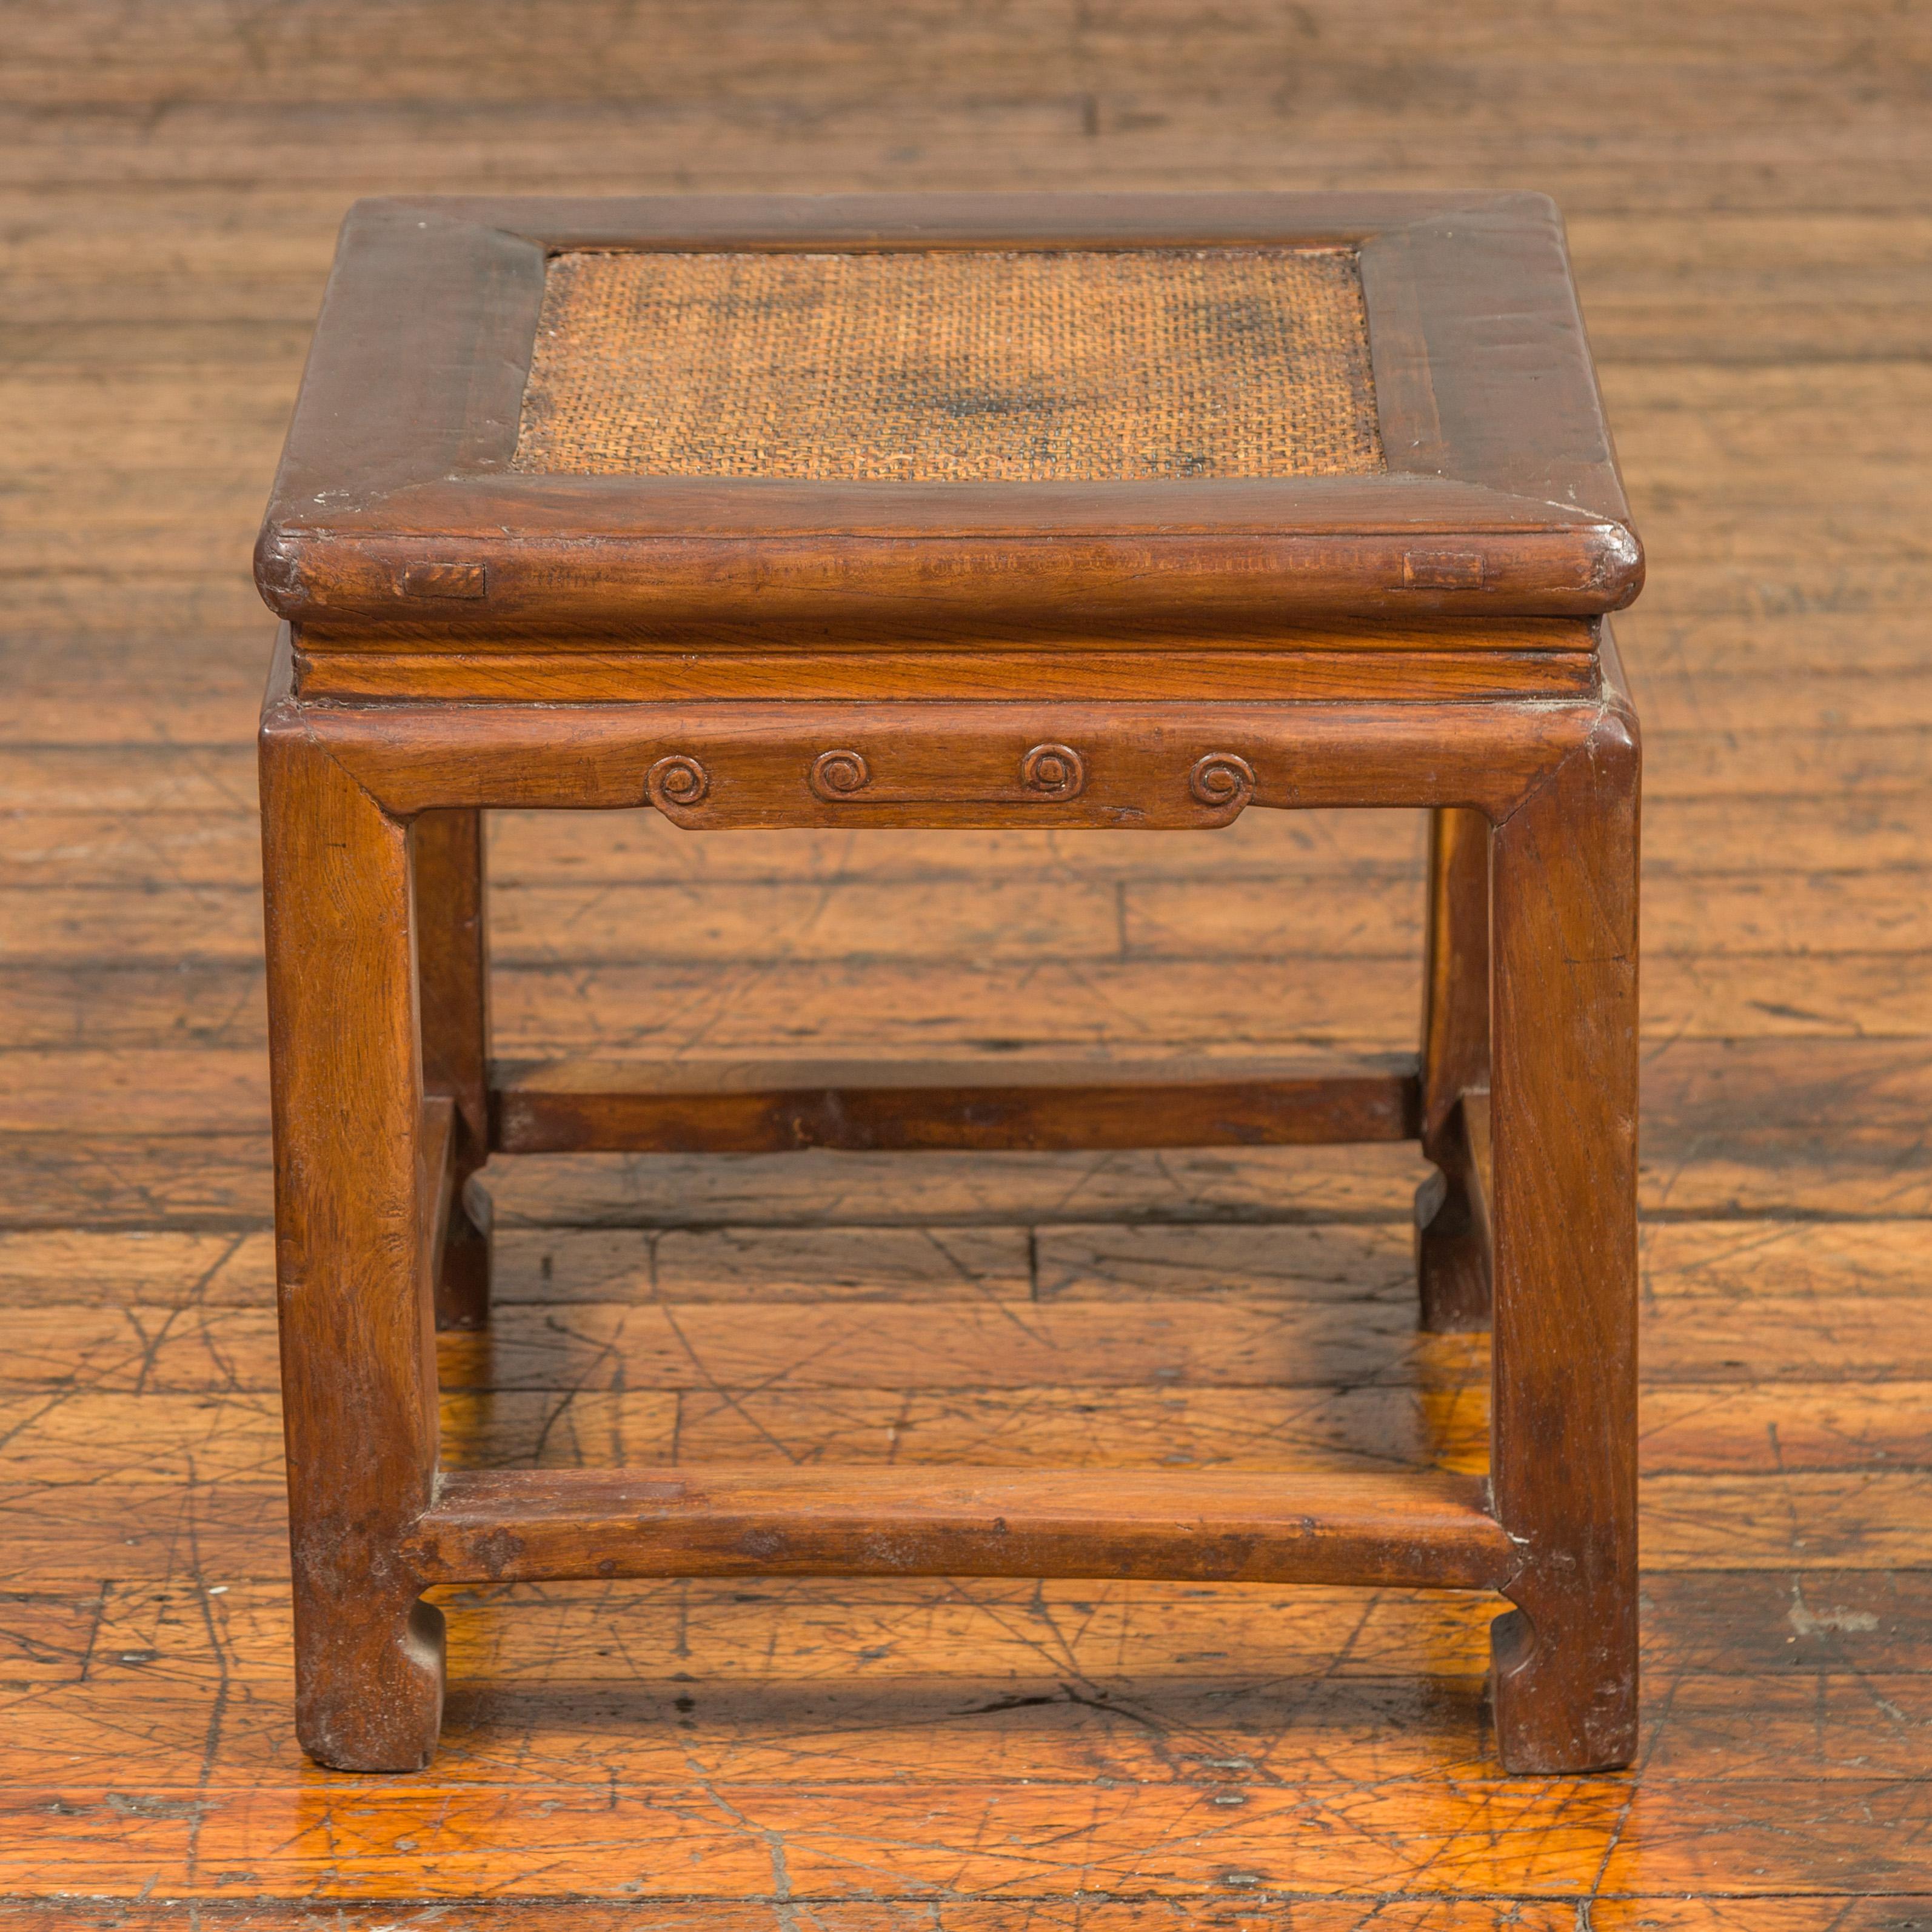 An antique Chinese Ming Dynasty style wooden waisted stool from the early 20th century, with rattan inset, horse hoof legs and cloud motifs. Born in China during the early years of the 20th century, this stool features a woven rattan square top